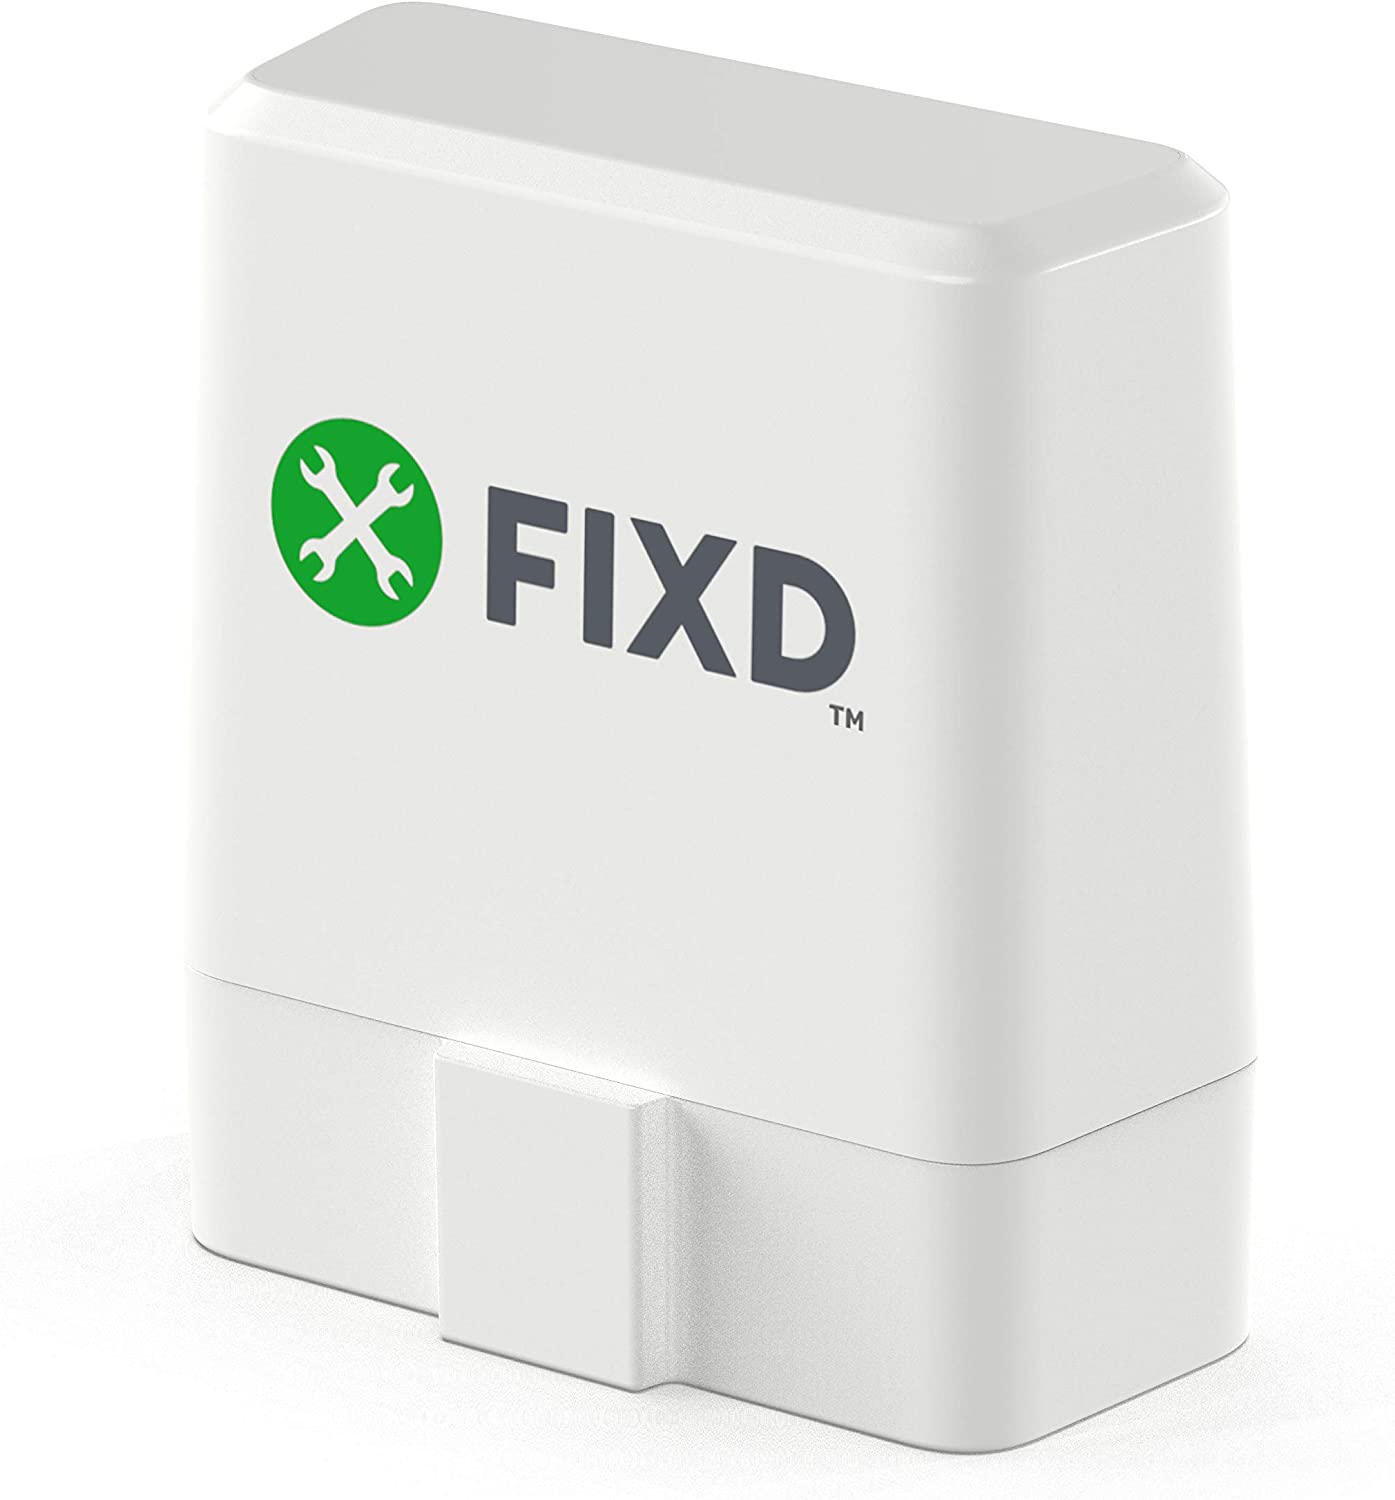 FIXD Bluetooth OBD2 Scanner for Car - Car Code Readers [...]